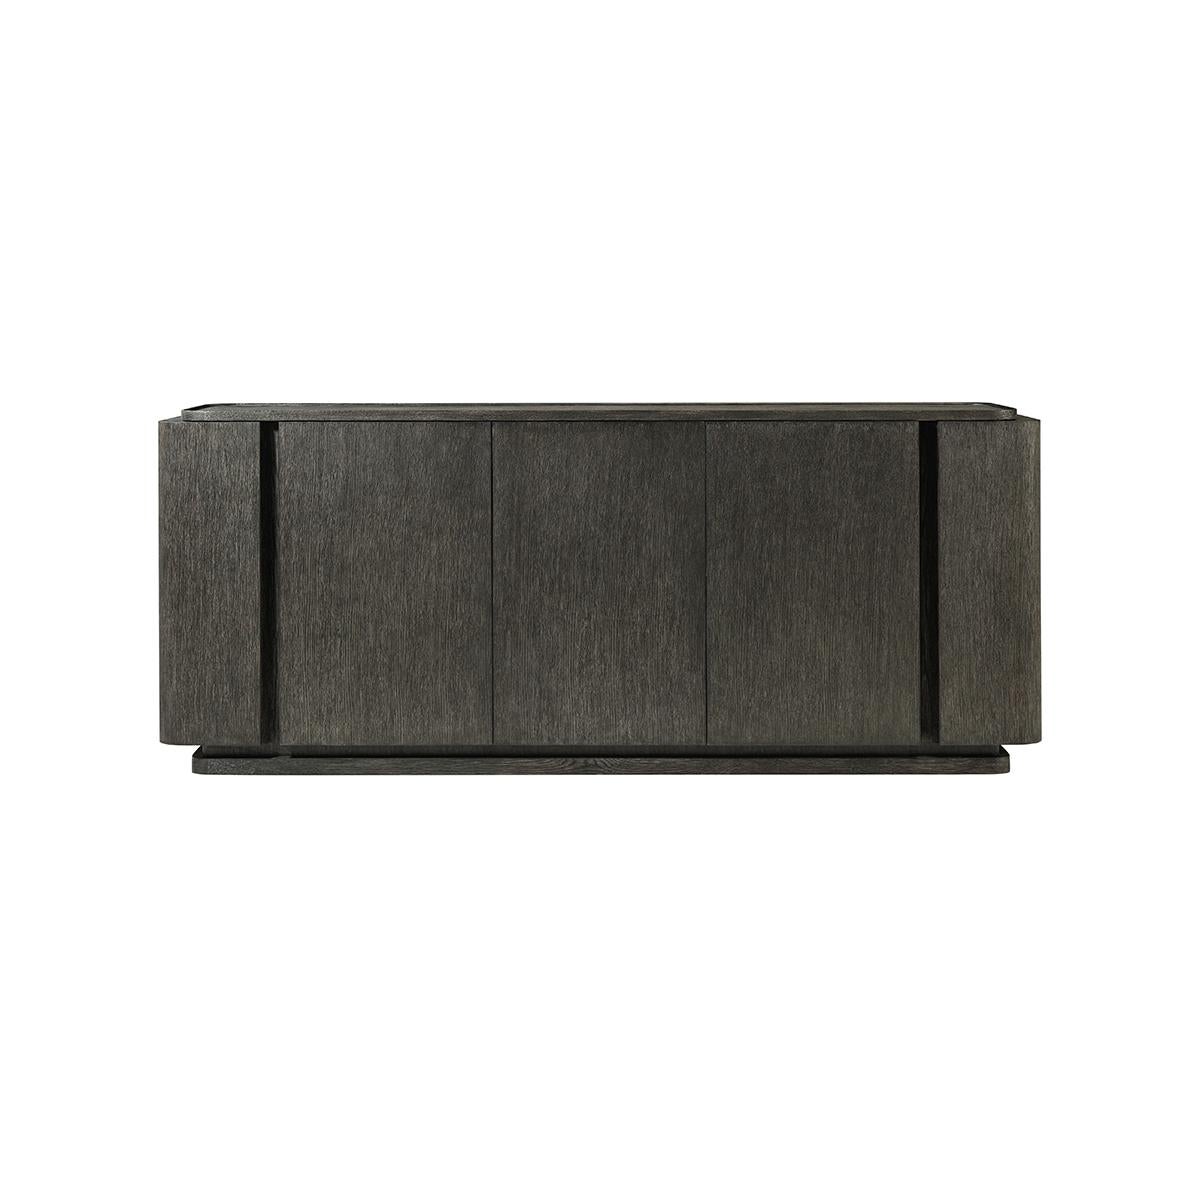 A hand-rubbed charcoal oak finish. Handcrafted from solid wood, the multistep, hand-finishing process on this 78-inch triple door sideboard creates a beautiful brushed-like effect that enhances the natural grain variation of the Oak Vaneer.

Hidden